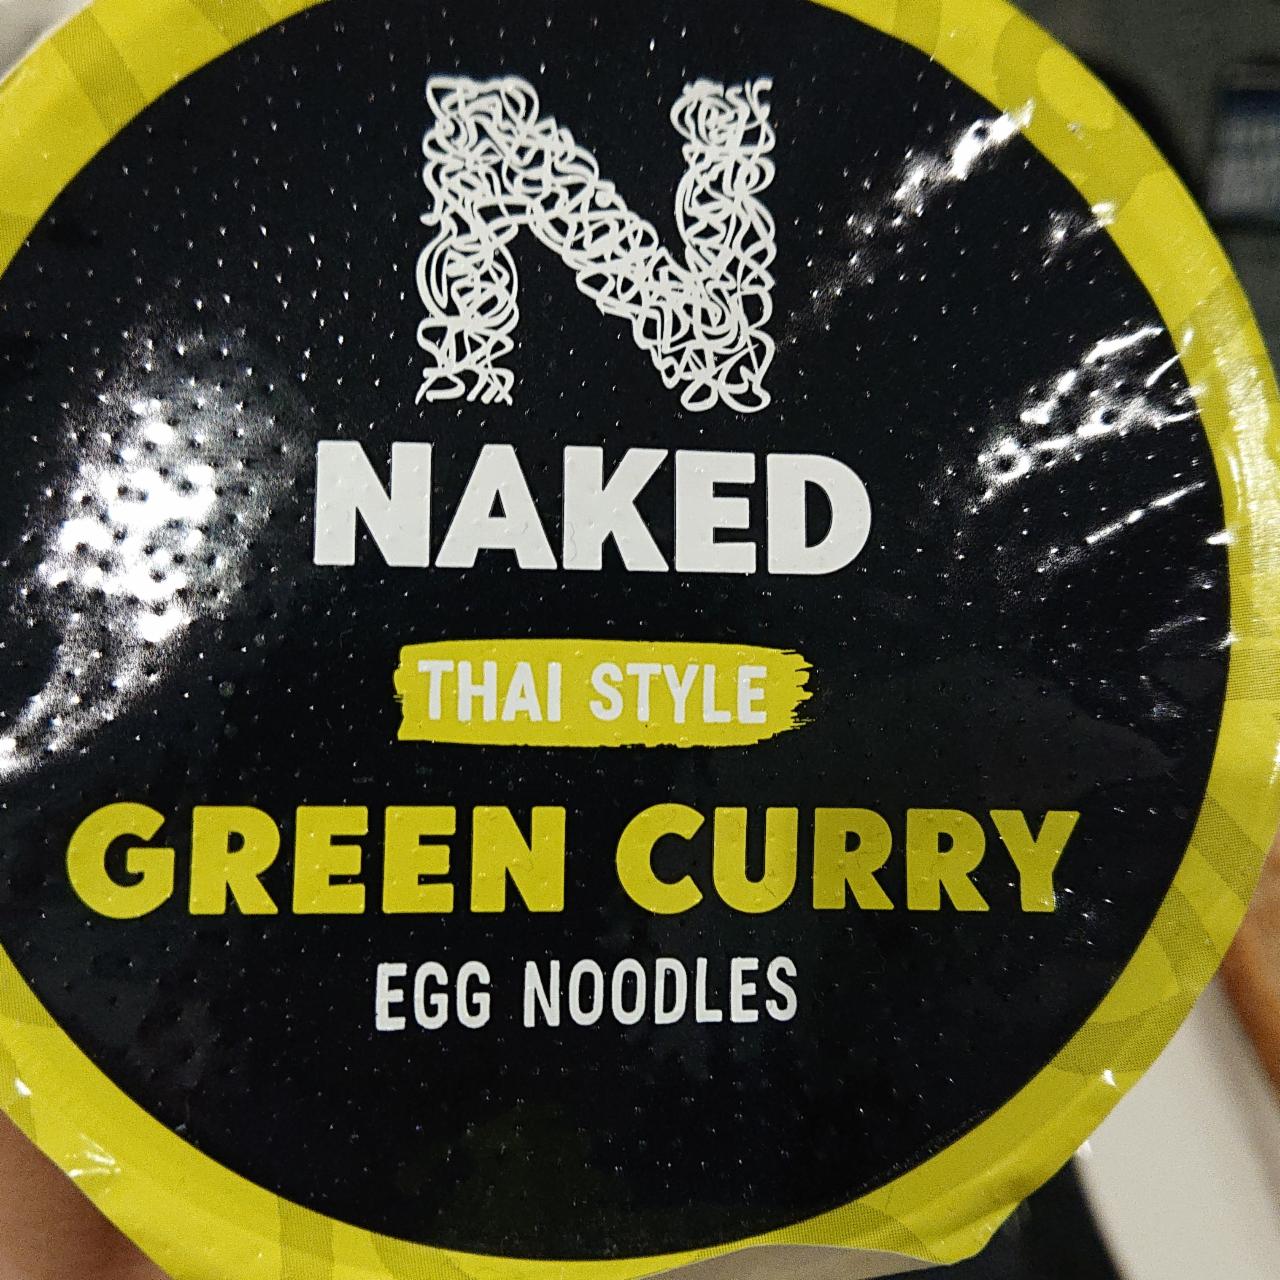 Fotografie - Thai Style Green Curry Egg Noodles Naked